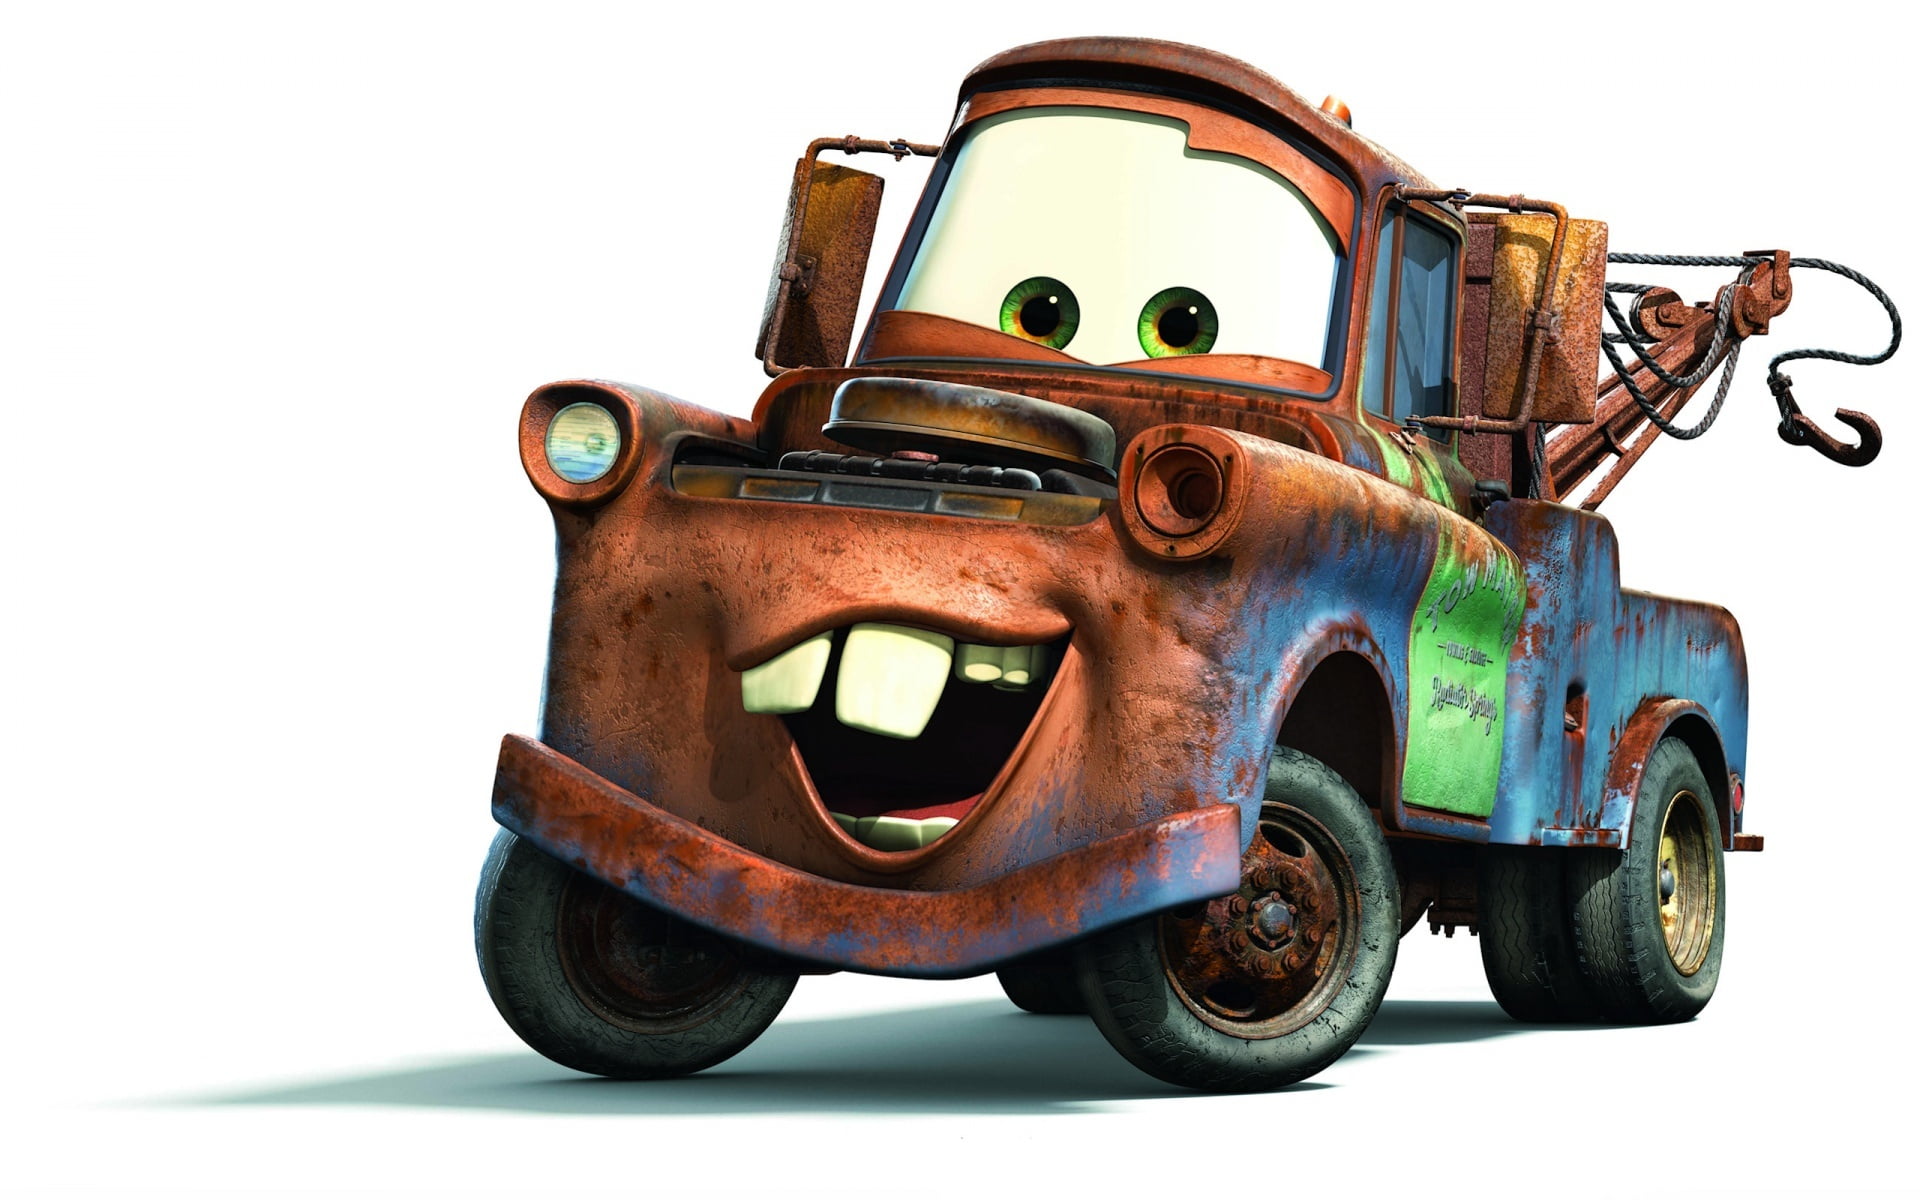 Disney Car Mater, Cars, tow truck, white background, rusty, mode of transportation